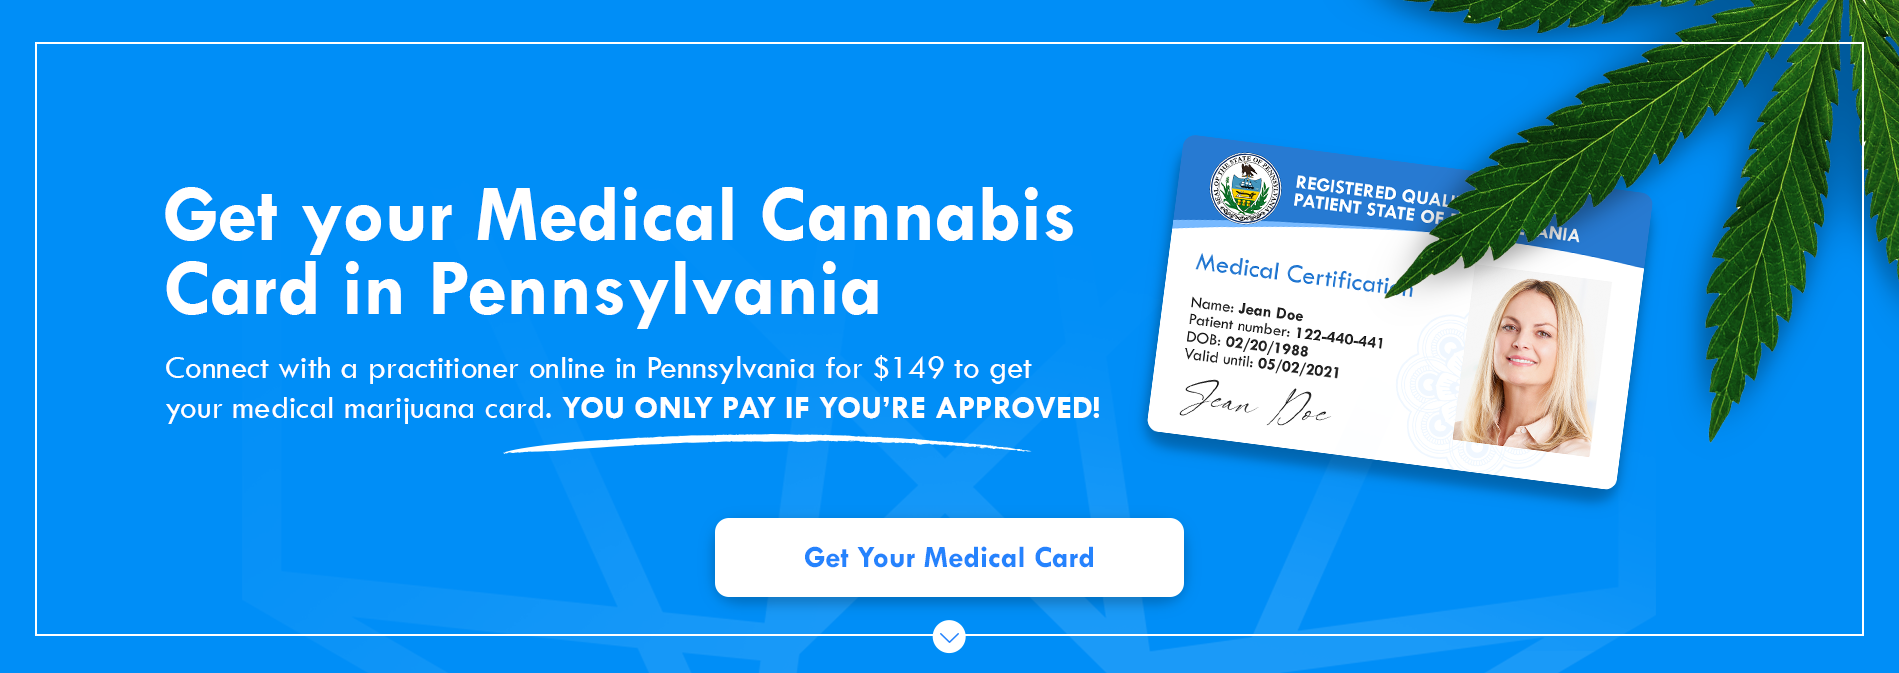 Get your Medical Cananbis Card In Pennsylvania. Connect with a practitioner online in Pennsylvania for $149 to get your medical merijuana card. You only pay if you're approved.